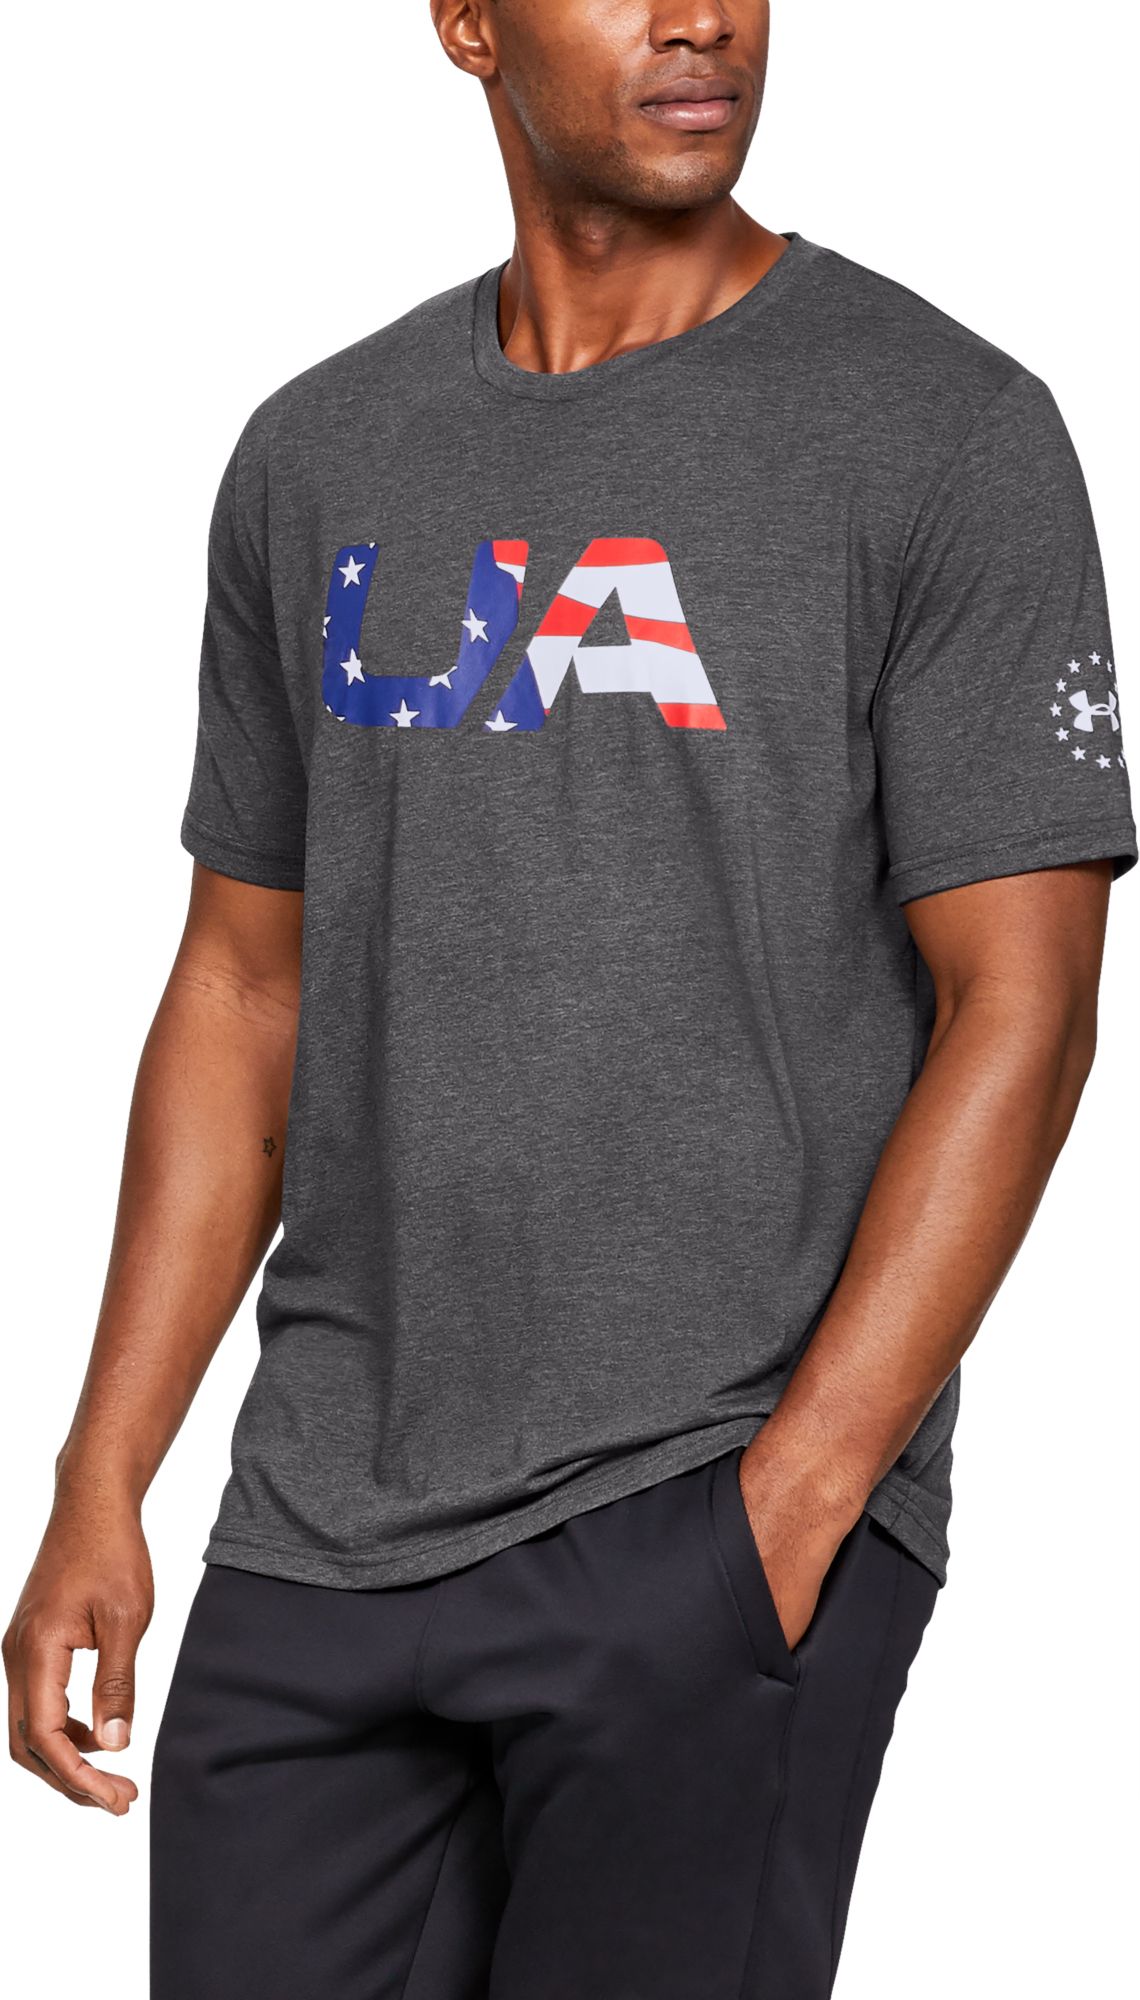 under armour men's graphic tees